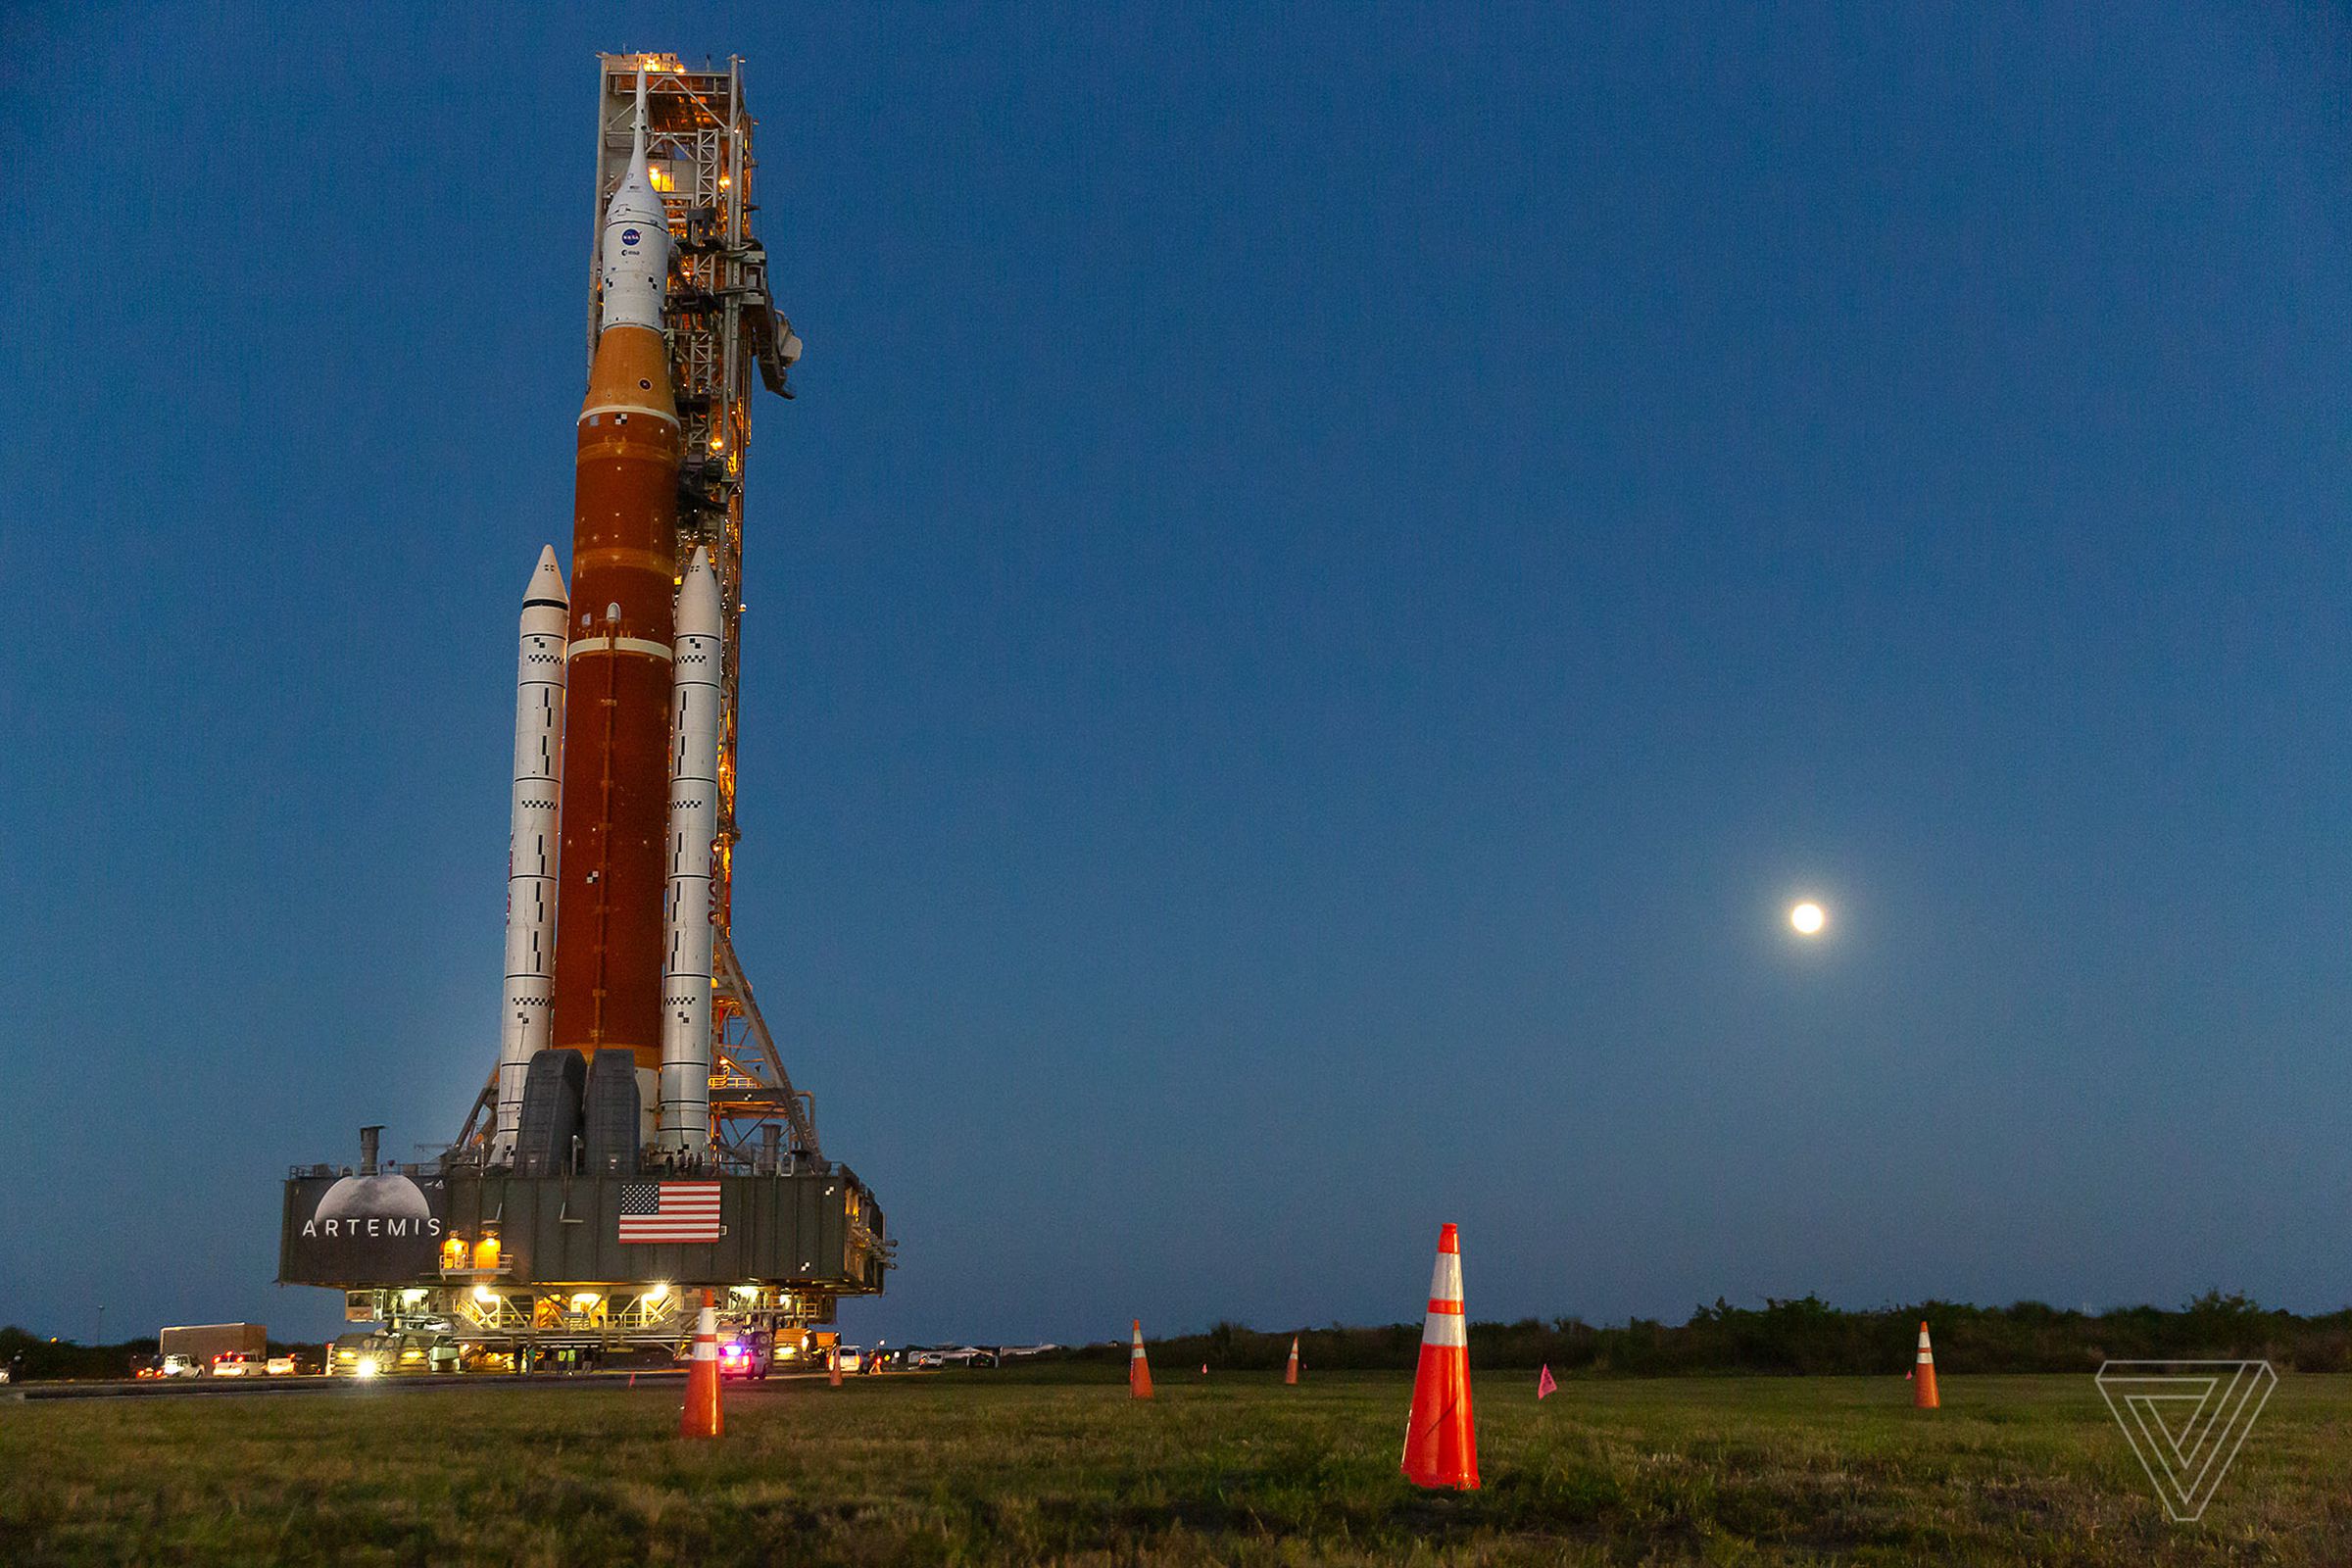 The Moon, the eventual destination of the SLS, shines in the background as the rocket rolls out.